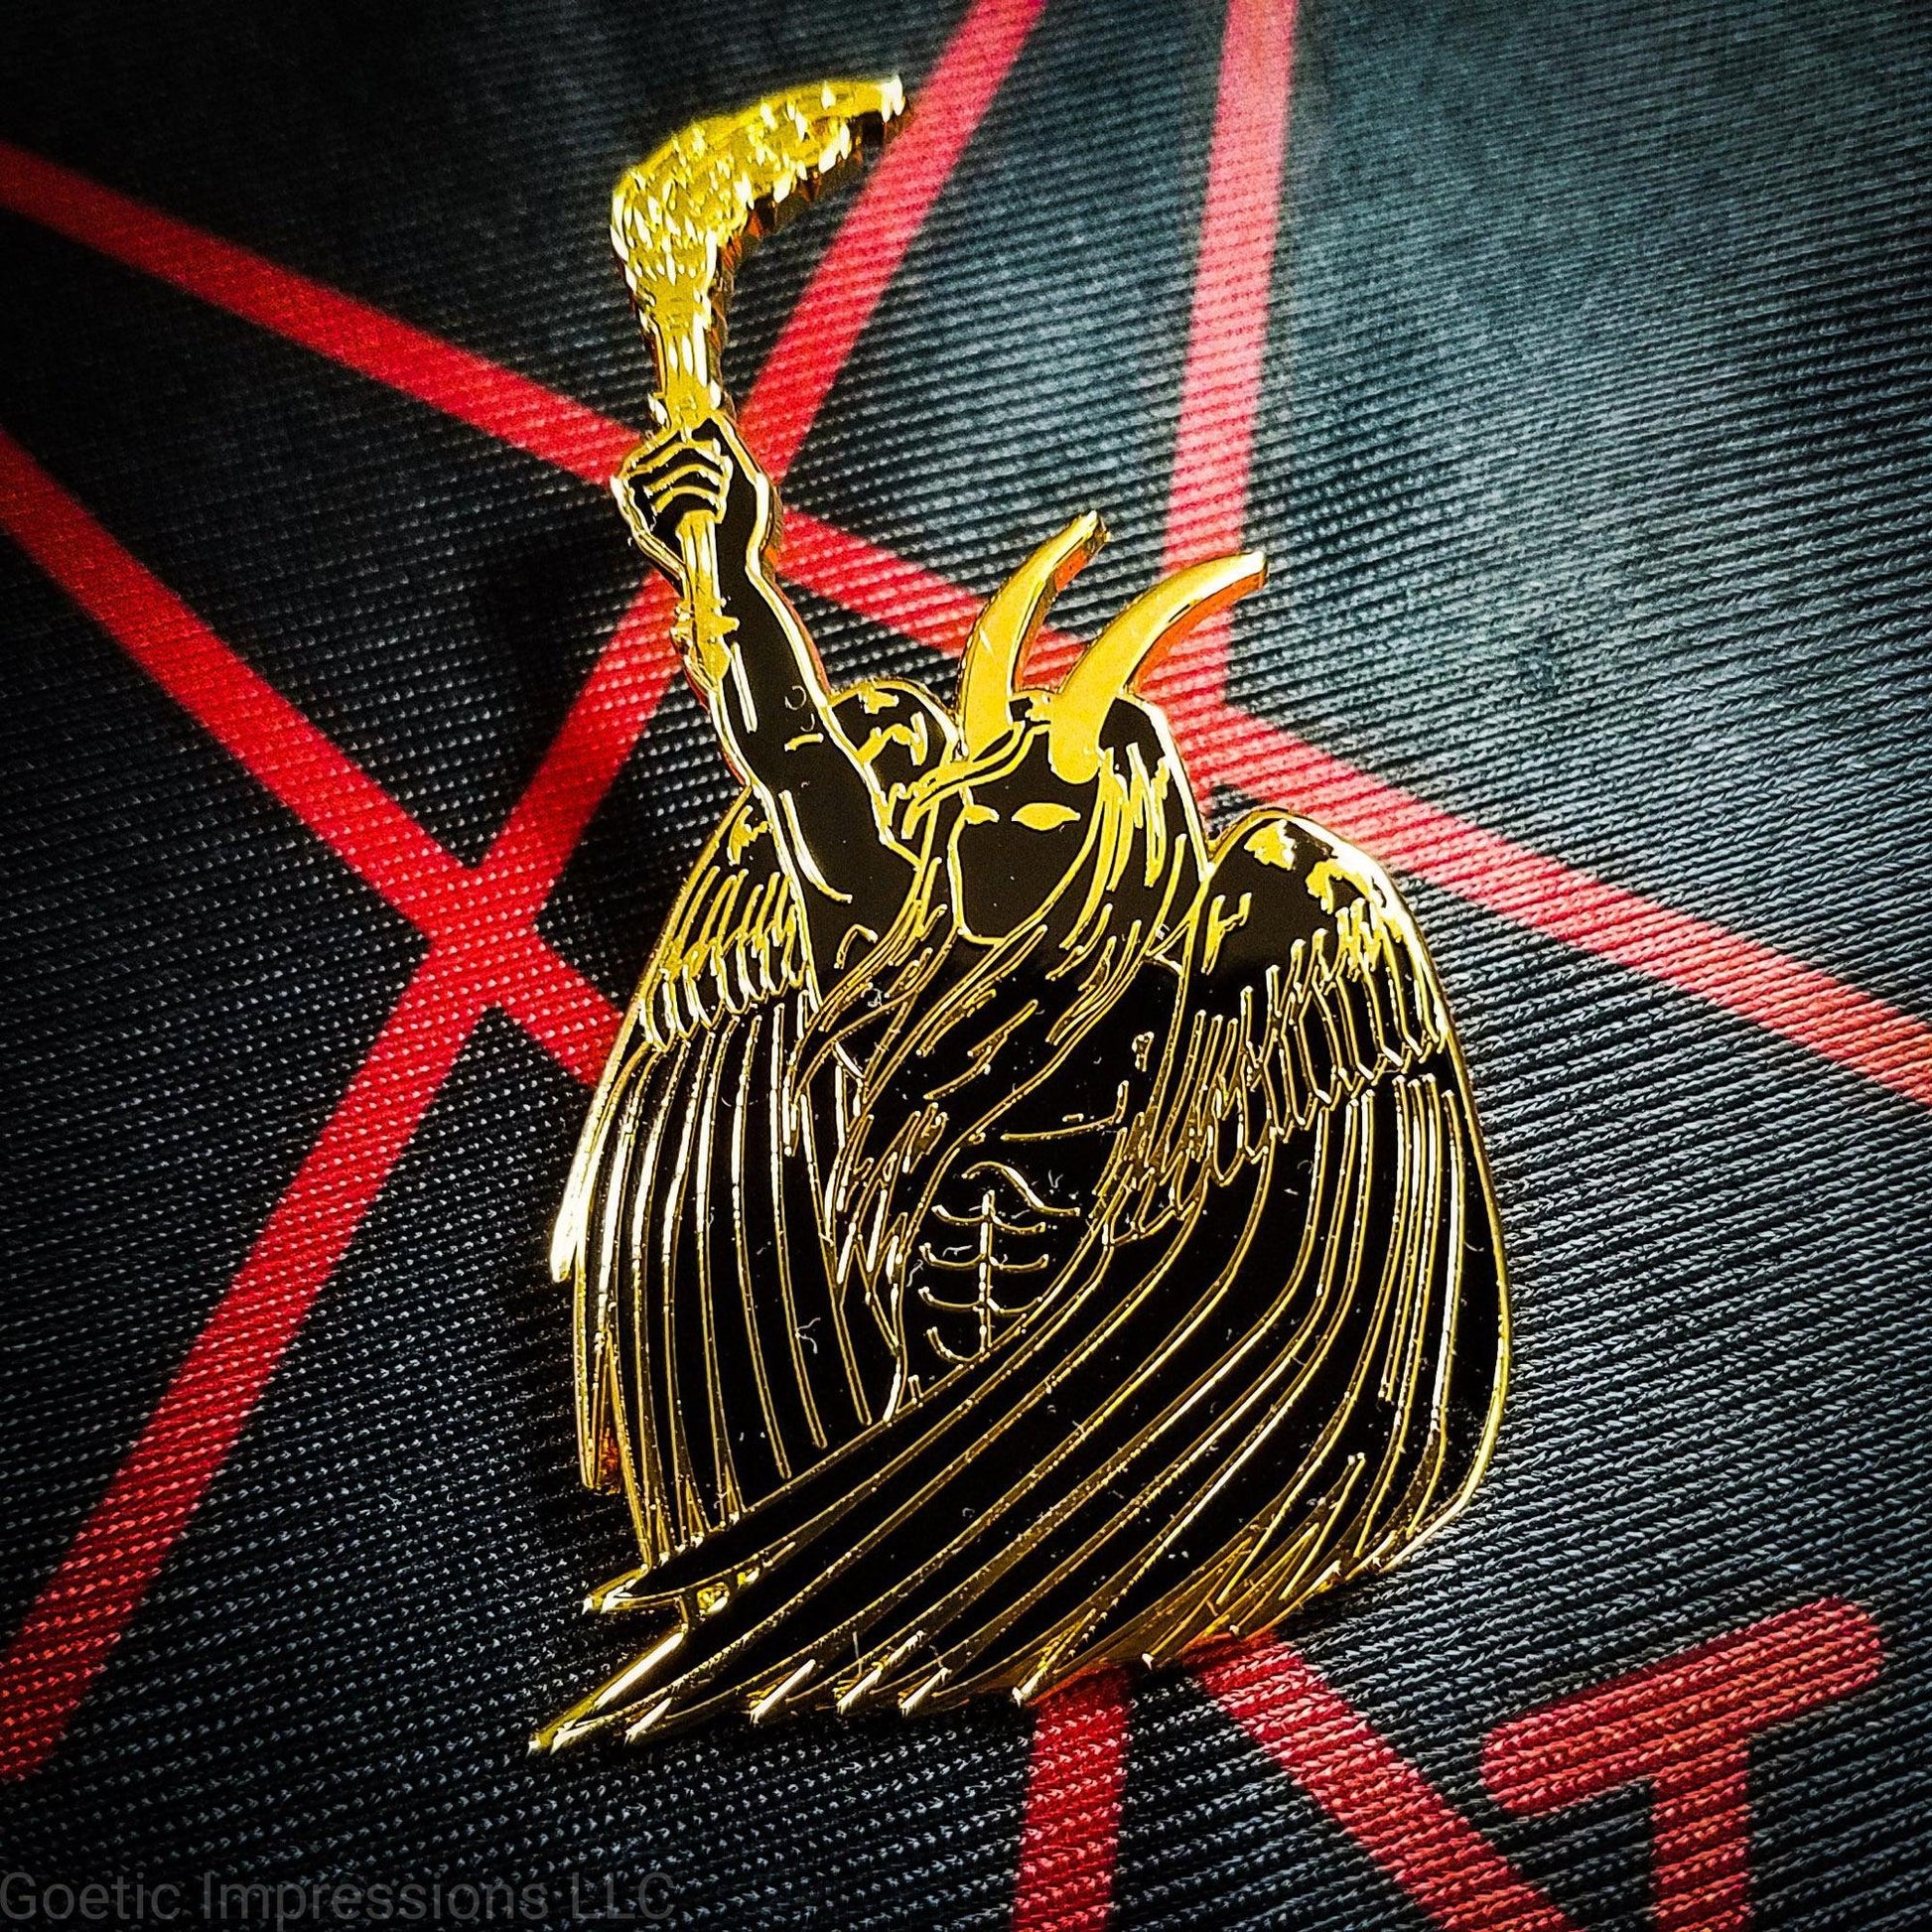 A black and gold hard enamel pin of Lucifer. Lucifer is holding a flaming torch held high and has his wings surrounding him. He has horns and is bare chested. The pin is on a red and black altar cloth with Lucifer's sigil on it. 